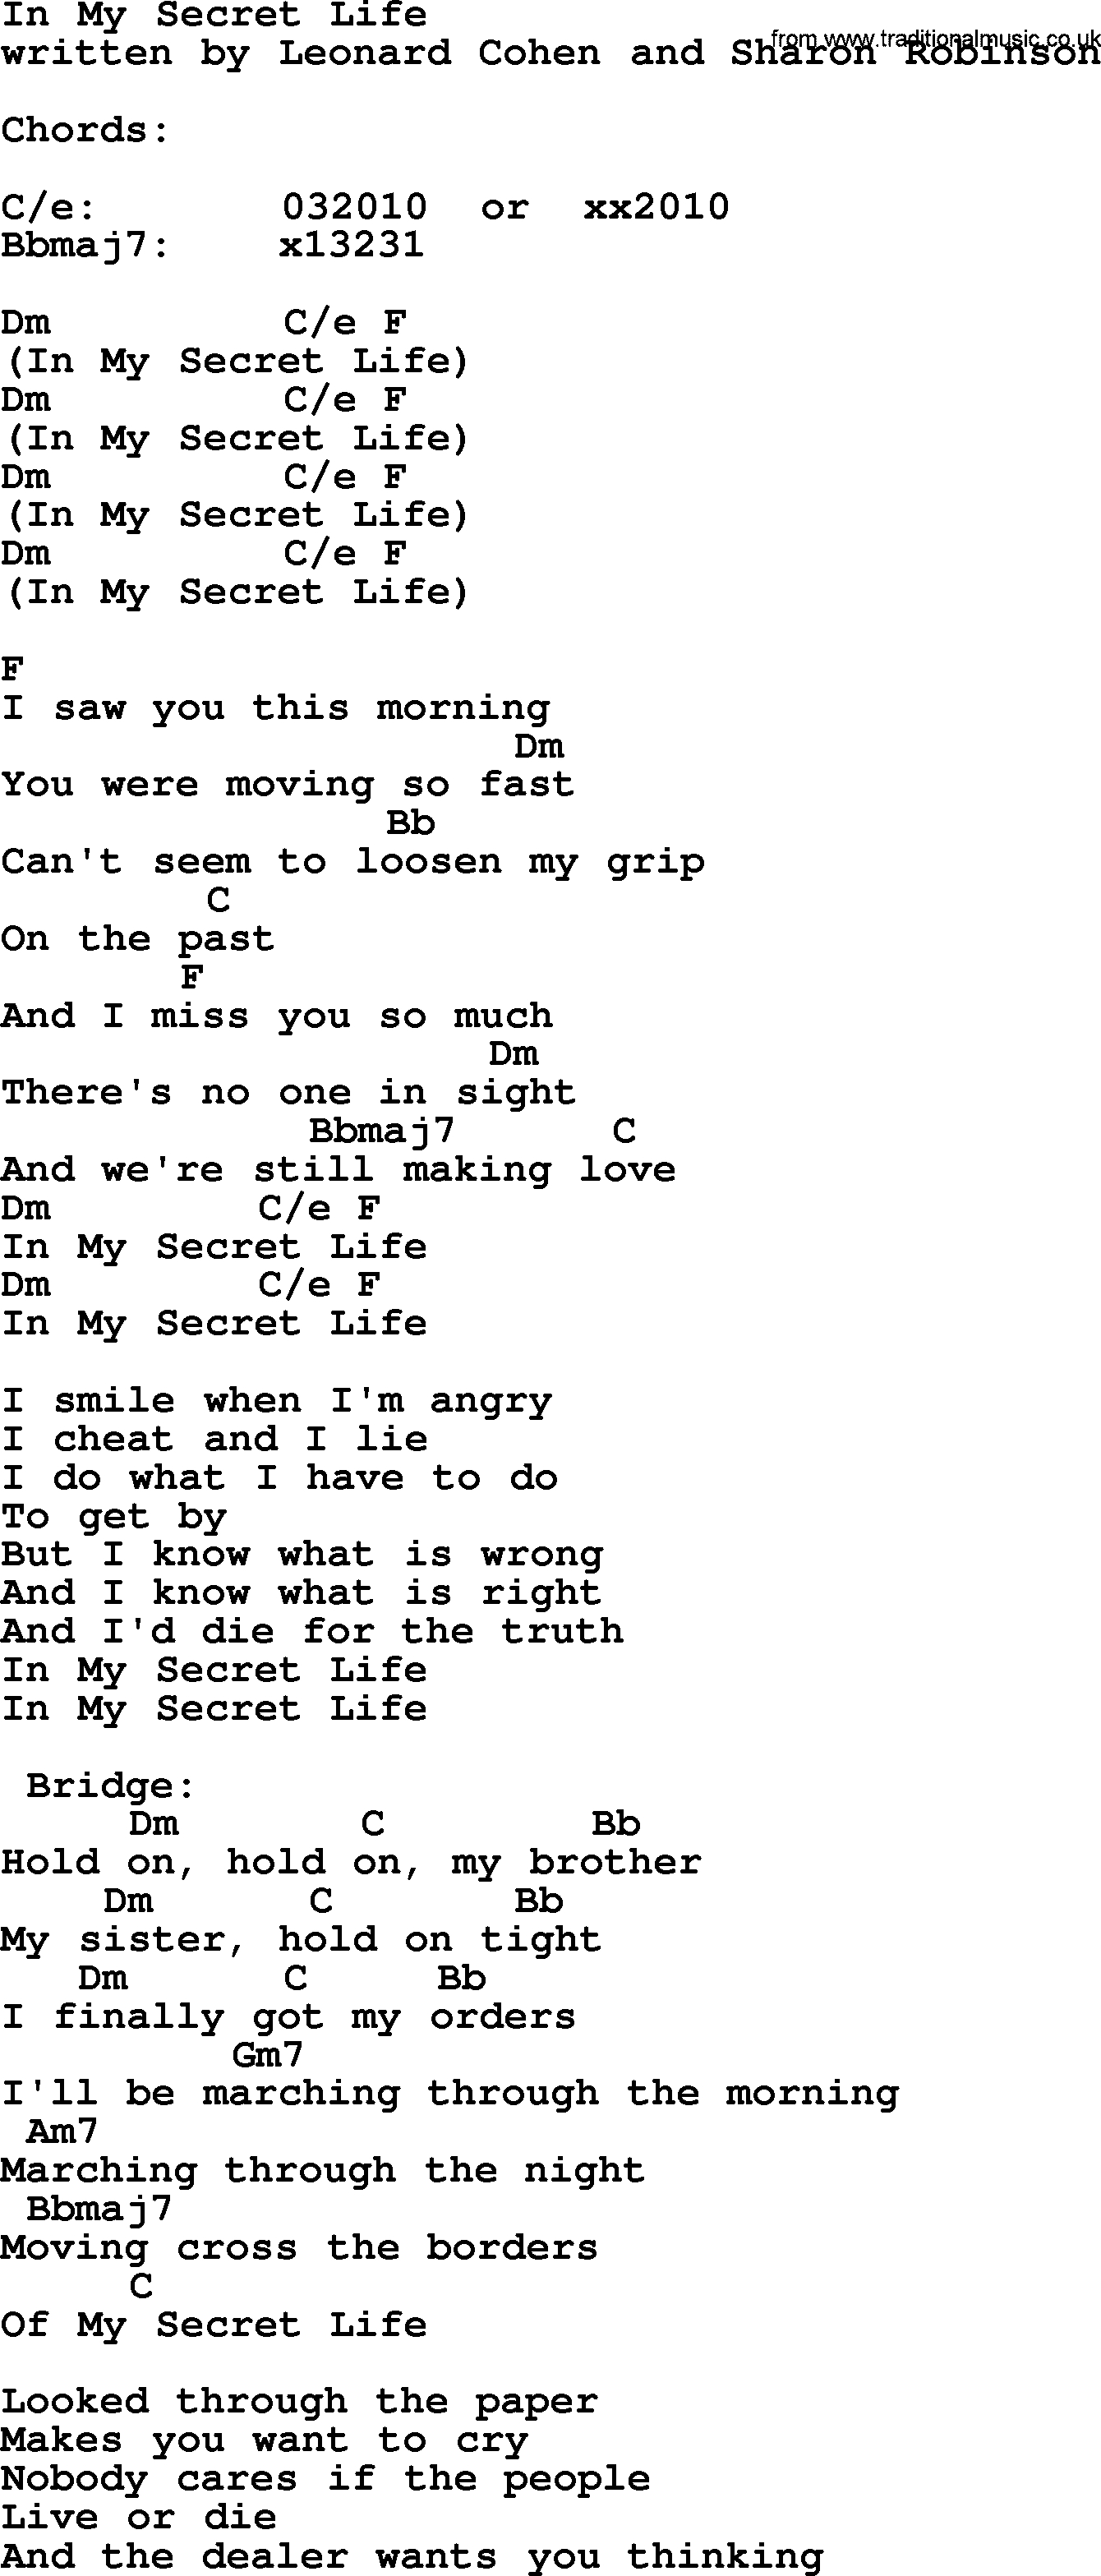 In My Life Chords Leonard Cohen Song In My Secret Life Lyrics And Chords